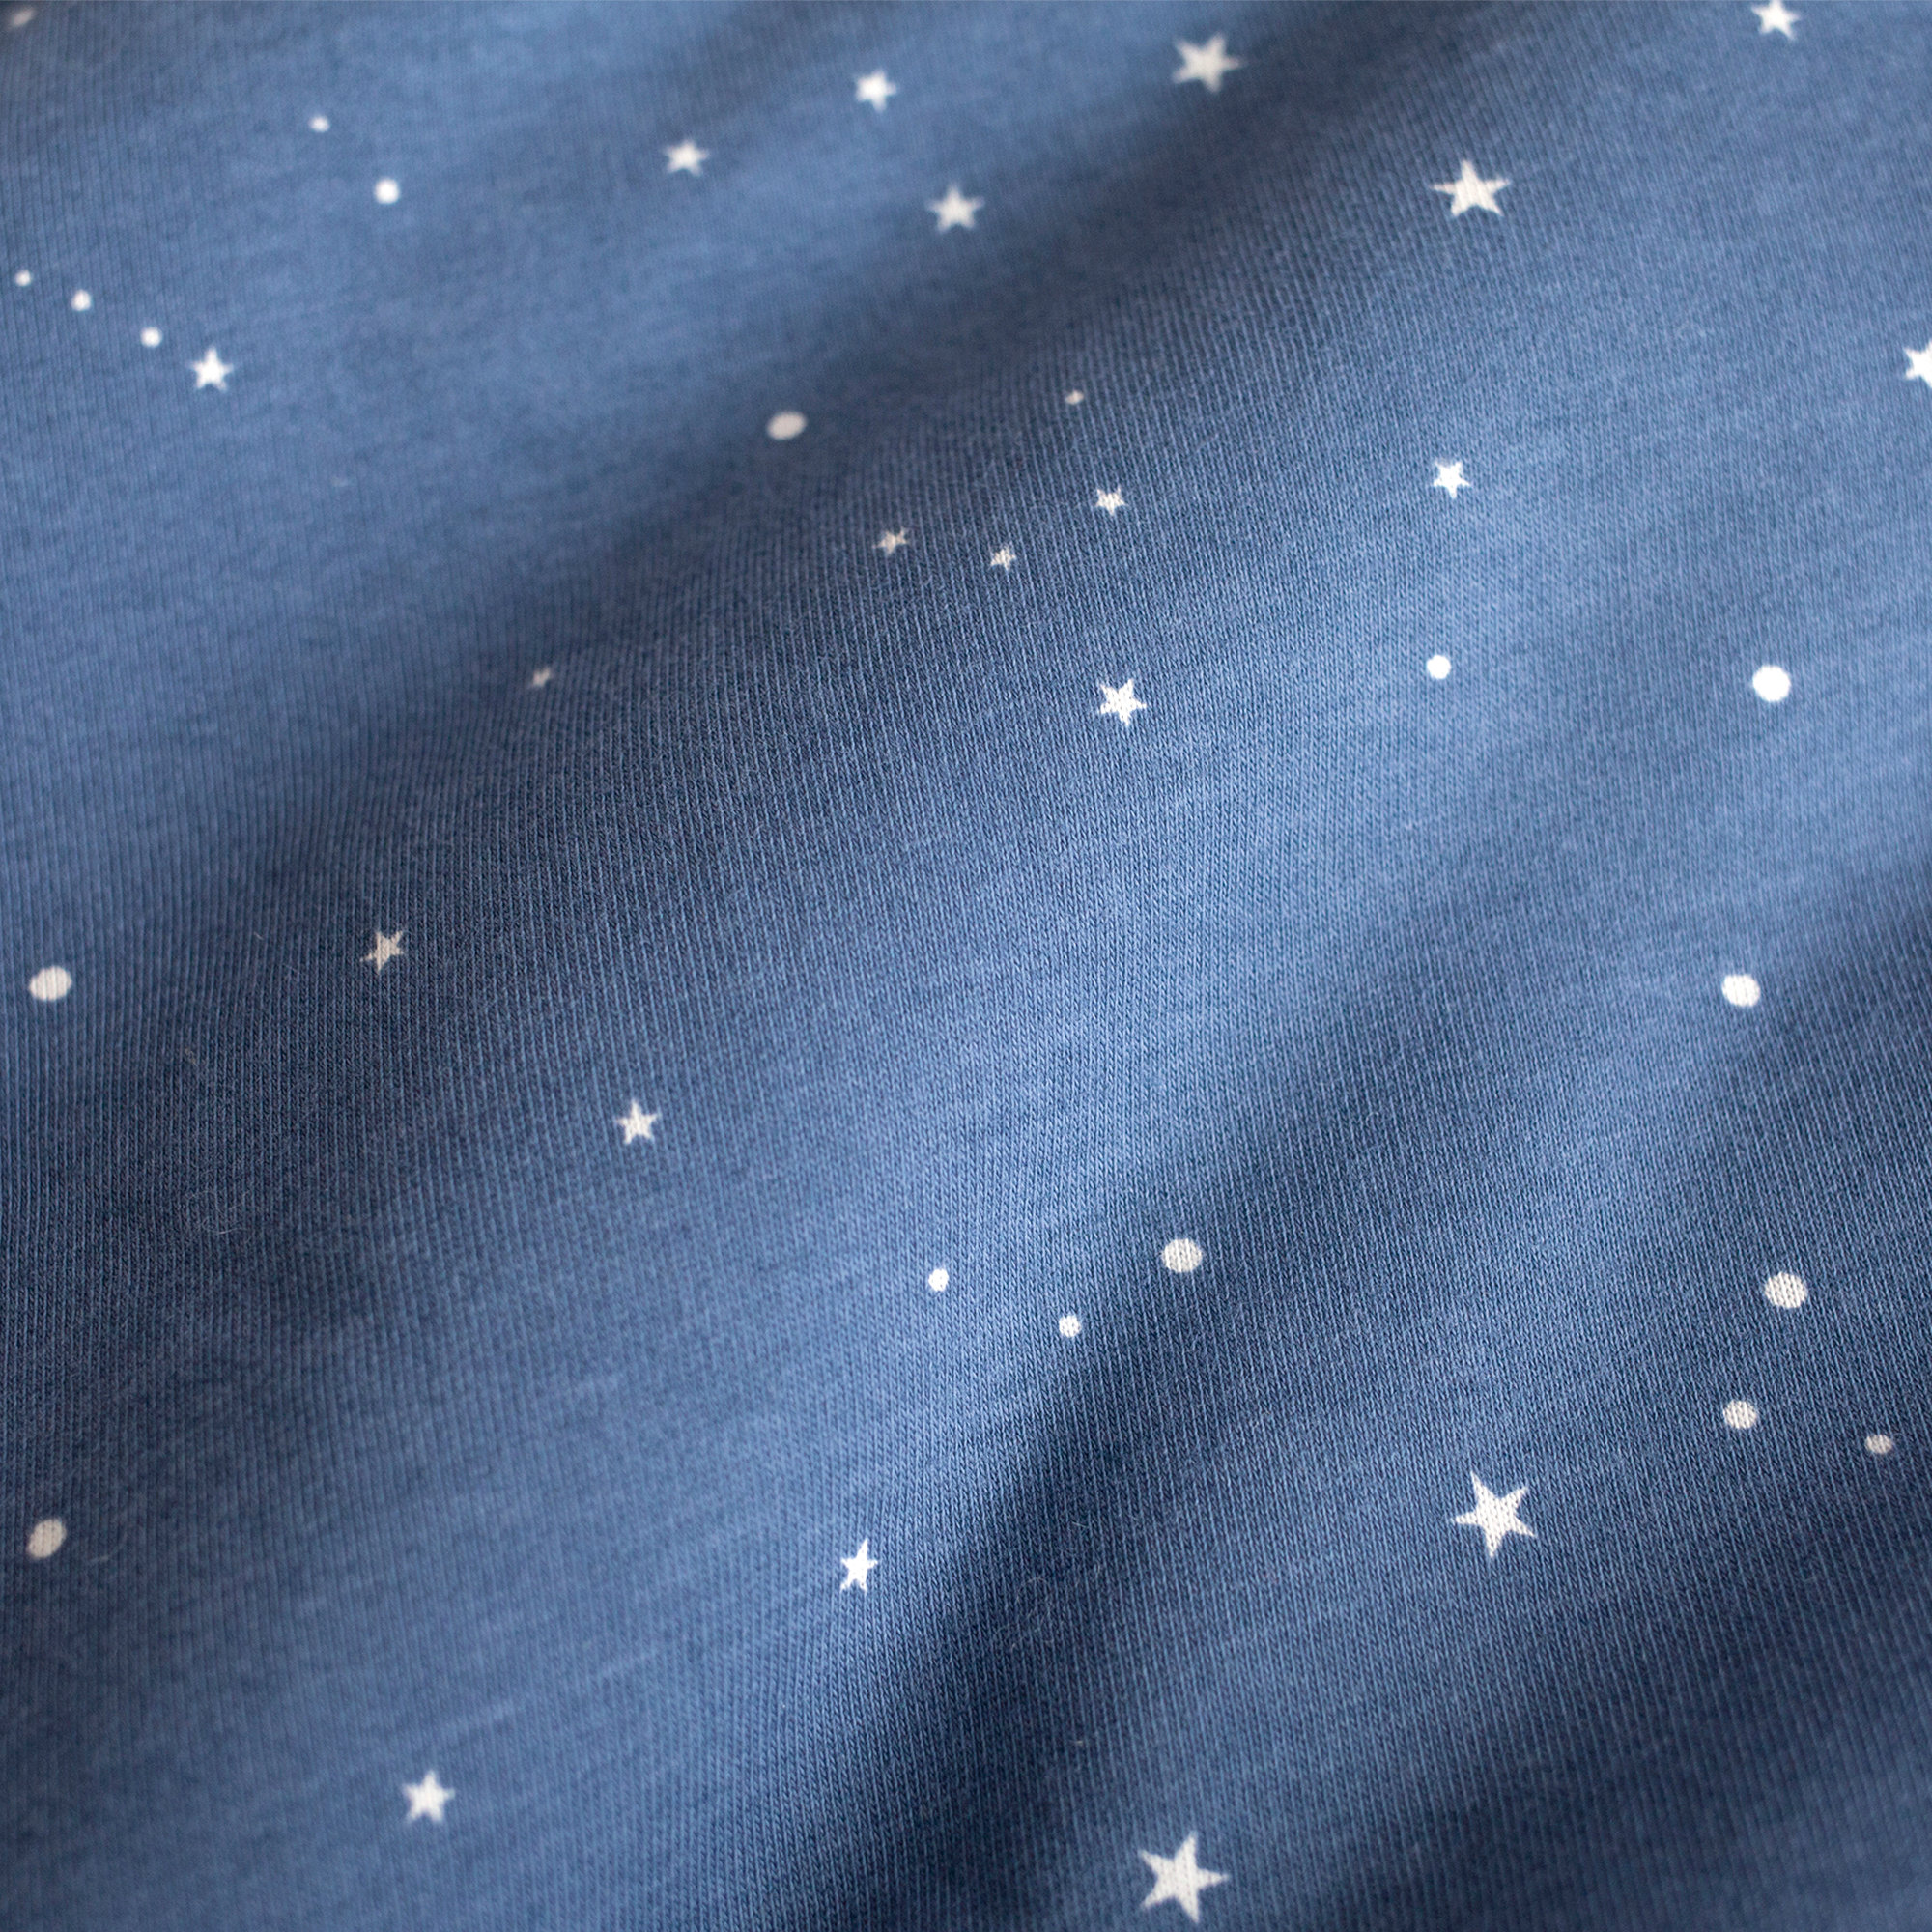 Protector de parque Pady jersey + jersey 75x95x28cm STARY Little stars print shadeOutlet